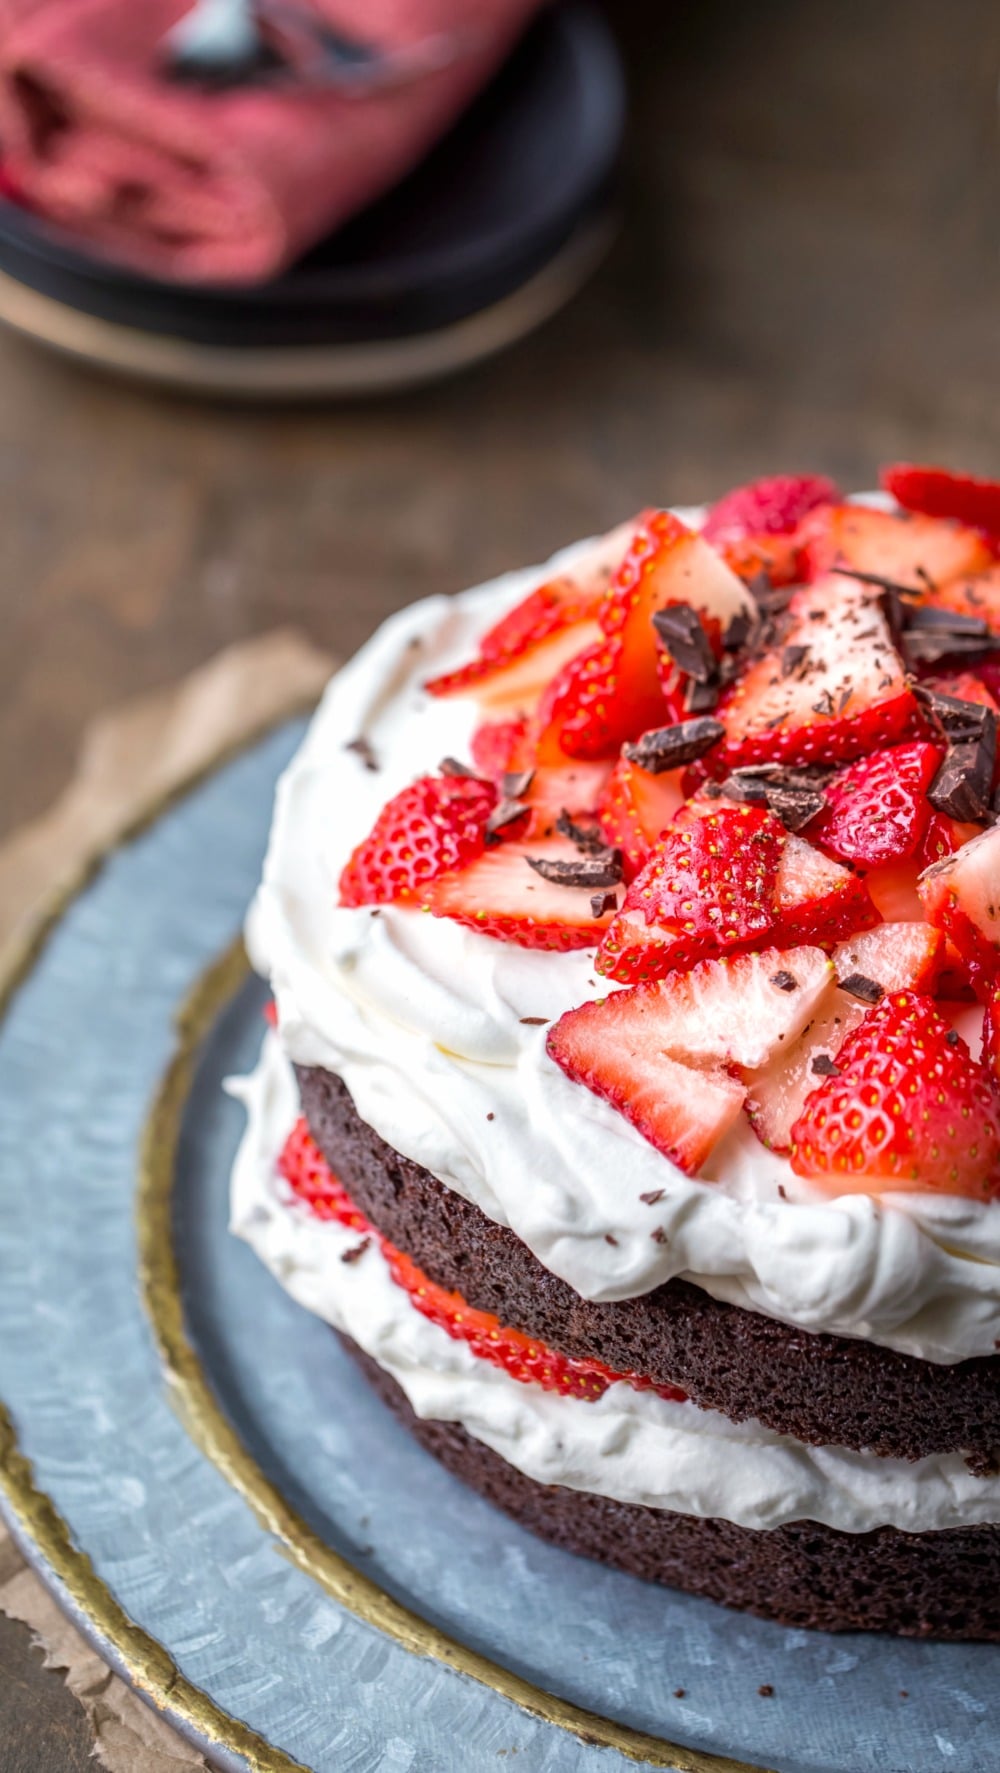 Strawberries and cream chocolate cake on a platter with plates and silverware in the background